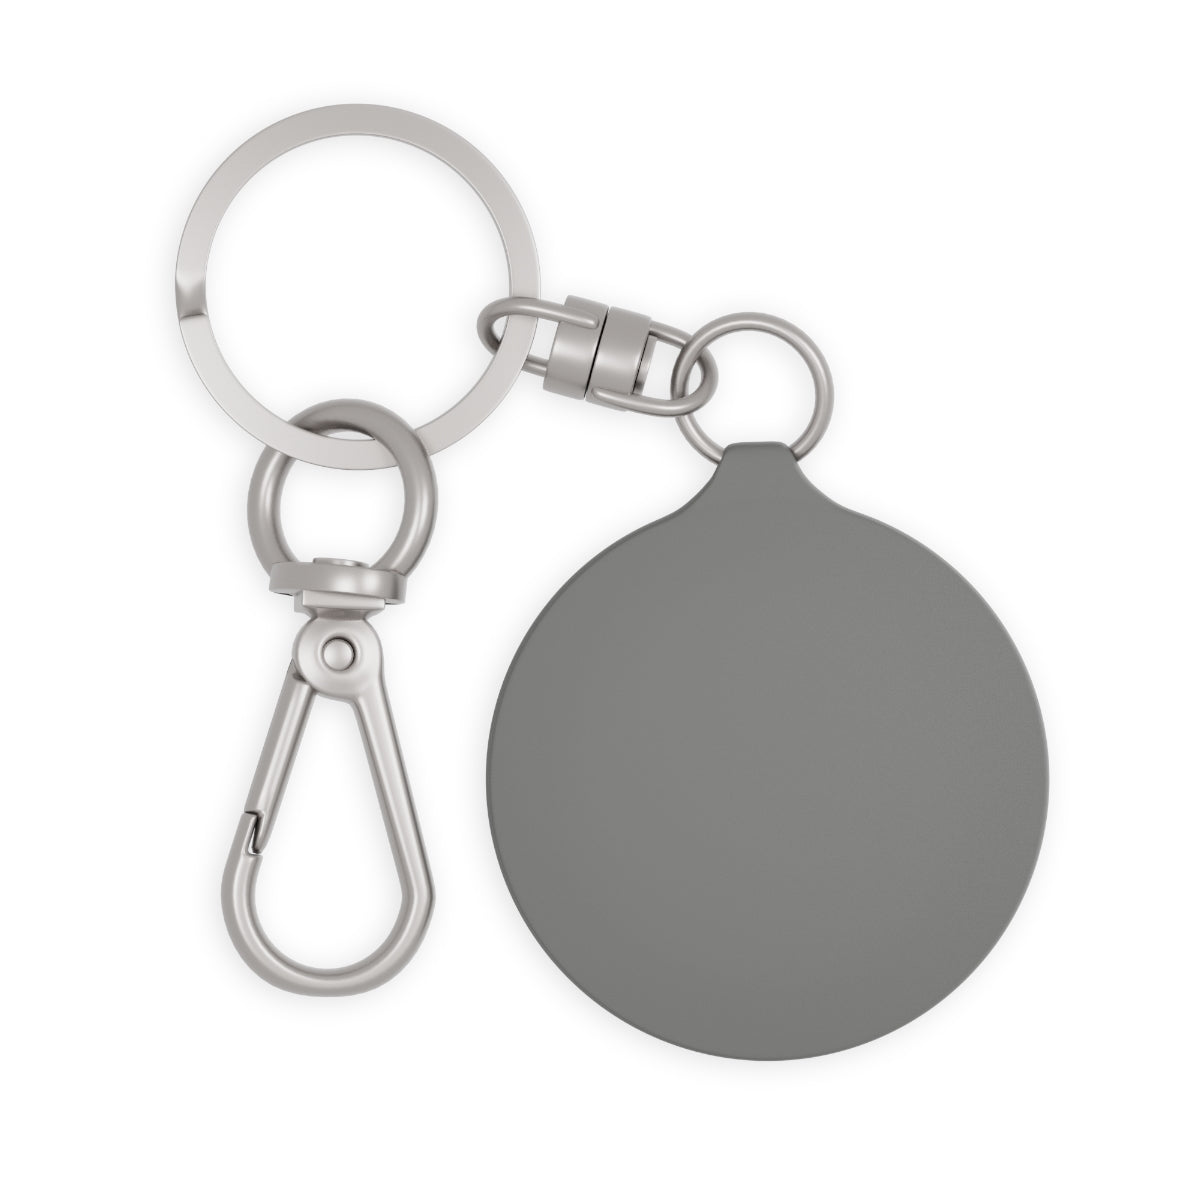 Divinely Inspired Purposefully Created Key Fob Printify